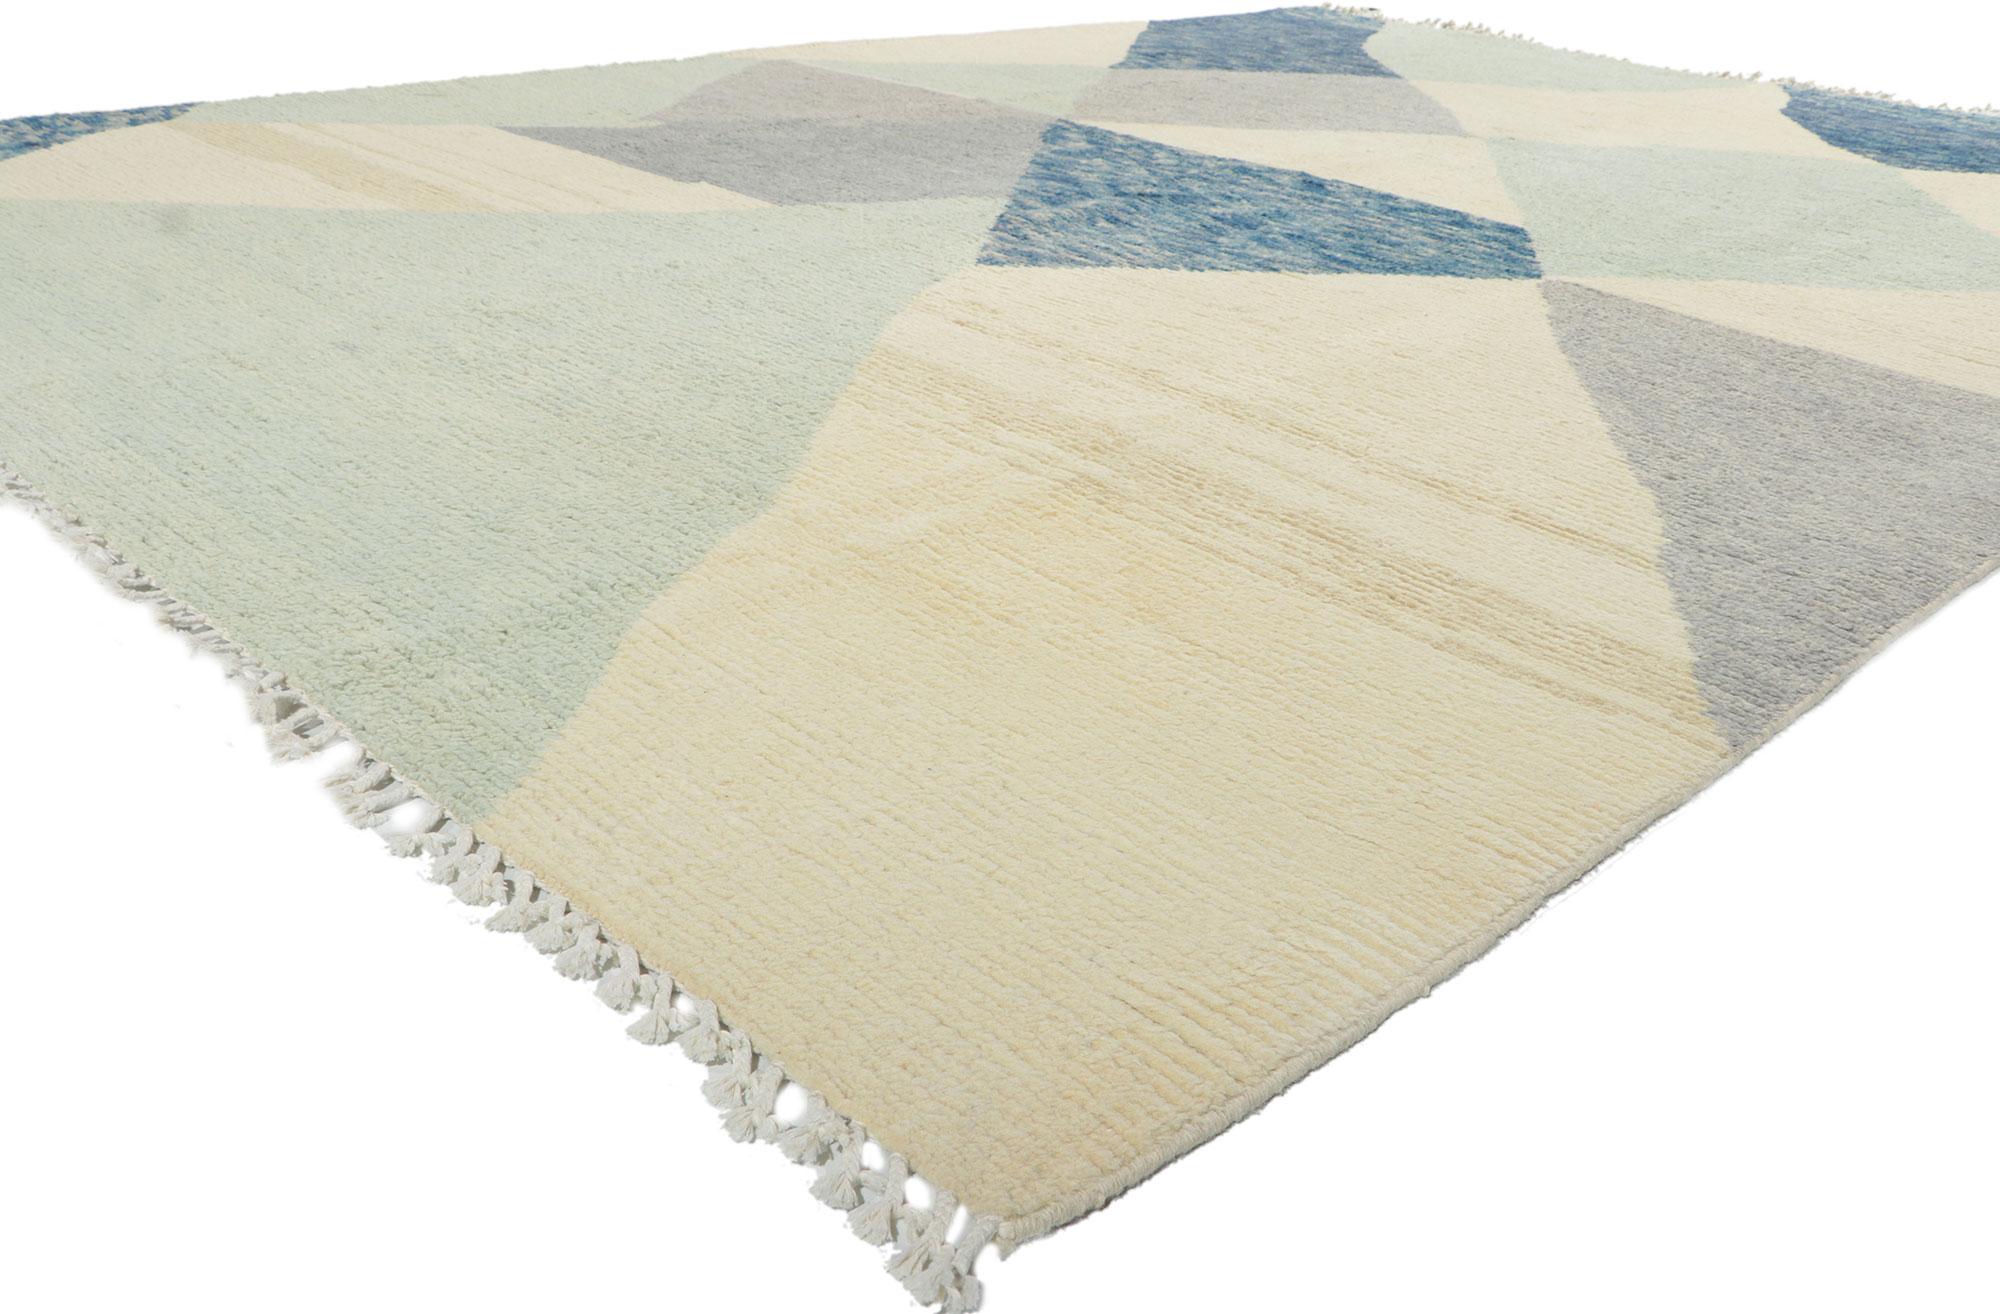 80635 New Abstract Moroccan Area Rug, 08'11 x 12'03.
Emanating modern style with incredible detail and texture, this hand knotted wool abstract Moroccan area rug is a captivating vision of woven beauty. The eye-catching graphic design and blue hues